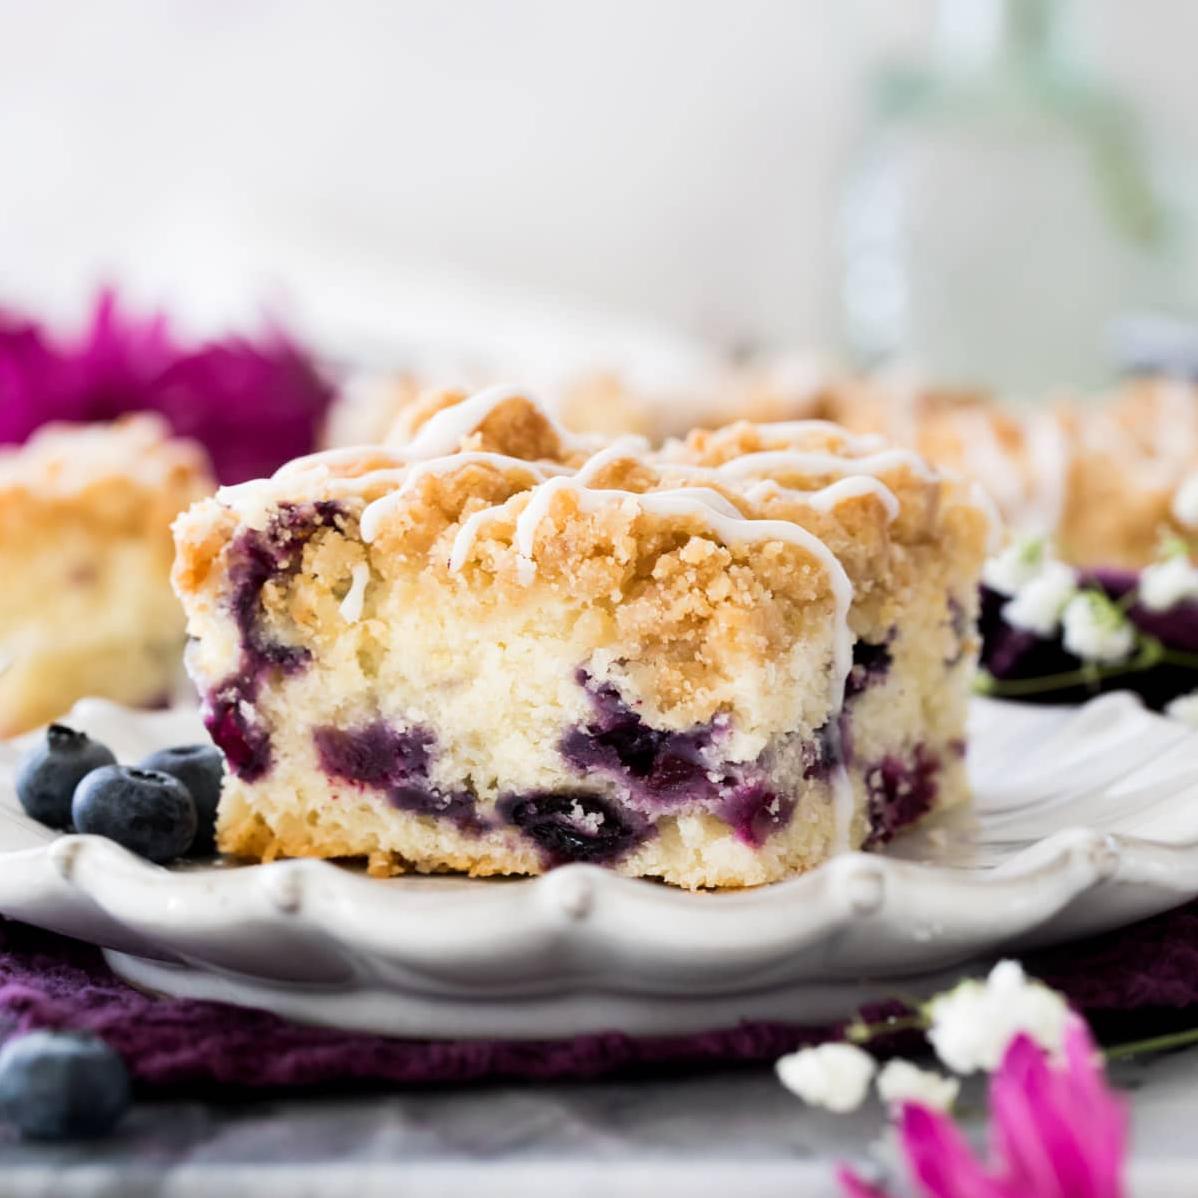  This blueberry coffee cake is perfect for a sweet breakfast or an afternoon snack. ☕